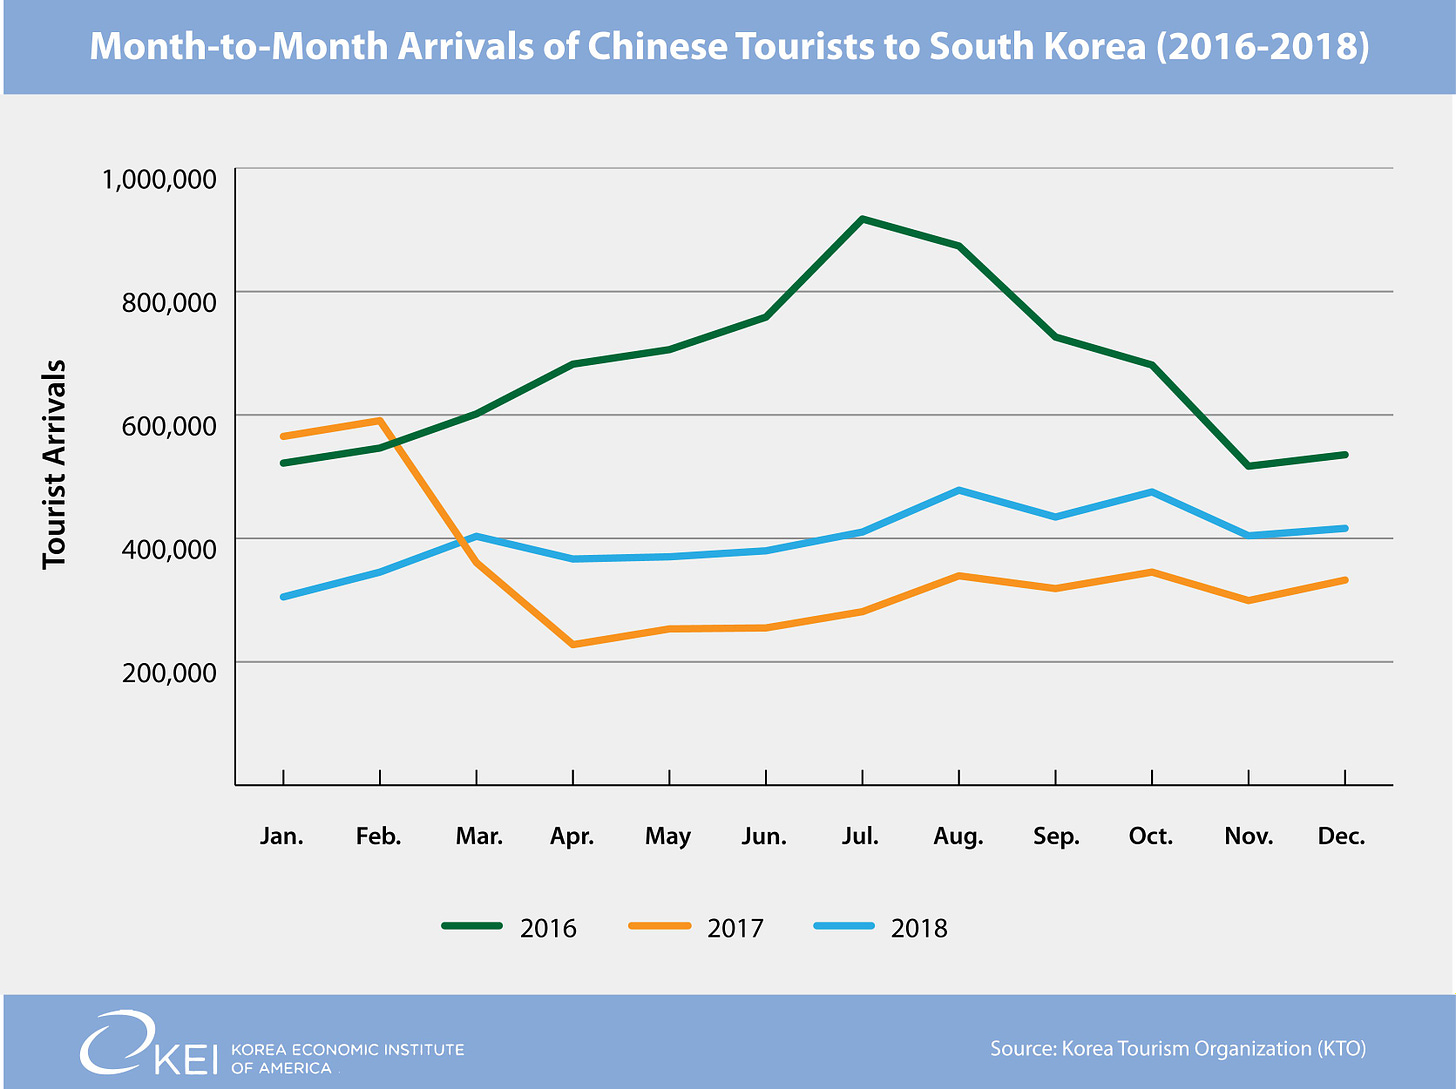 KEI on Twitter: "6/ Despite China's suggestions that relations w/ South  Korea have been normalized after the fallout over THAAD, Chinese tourism  still lags behind its pre-THAAD numbers. Total number of Chinese